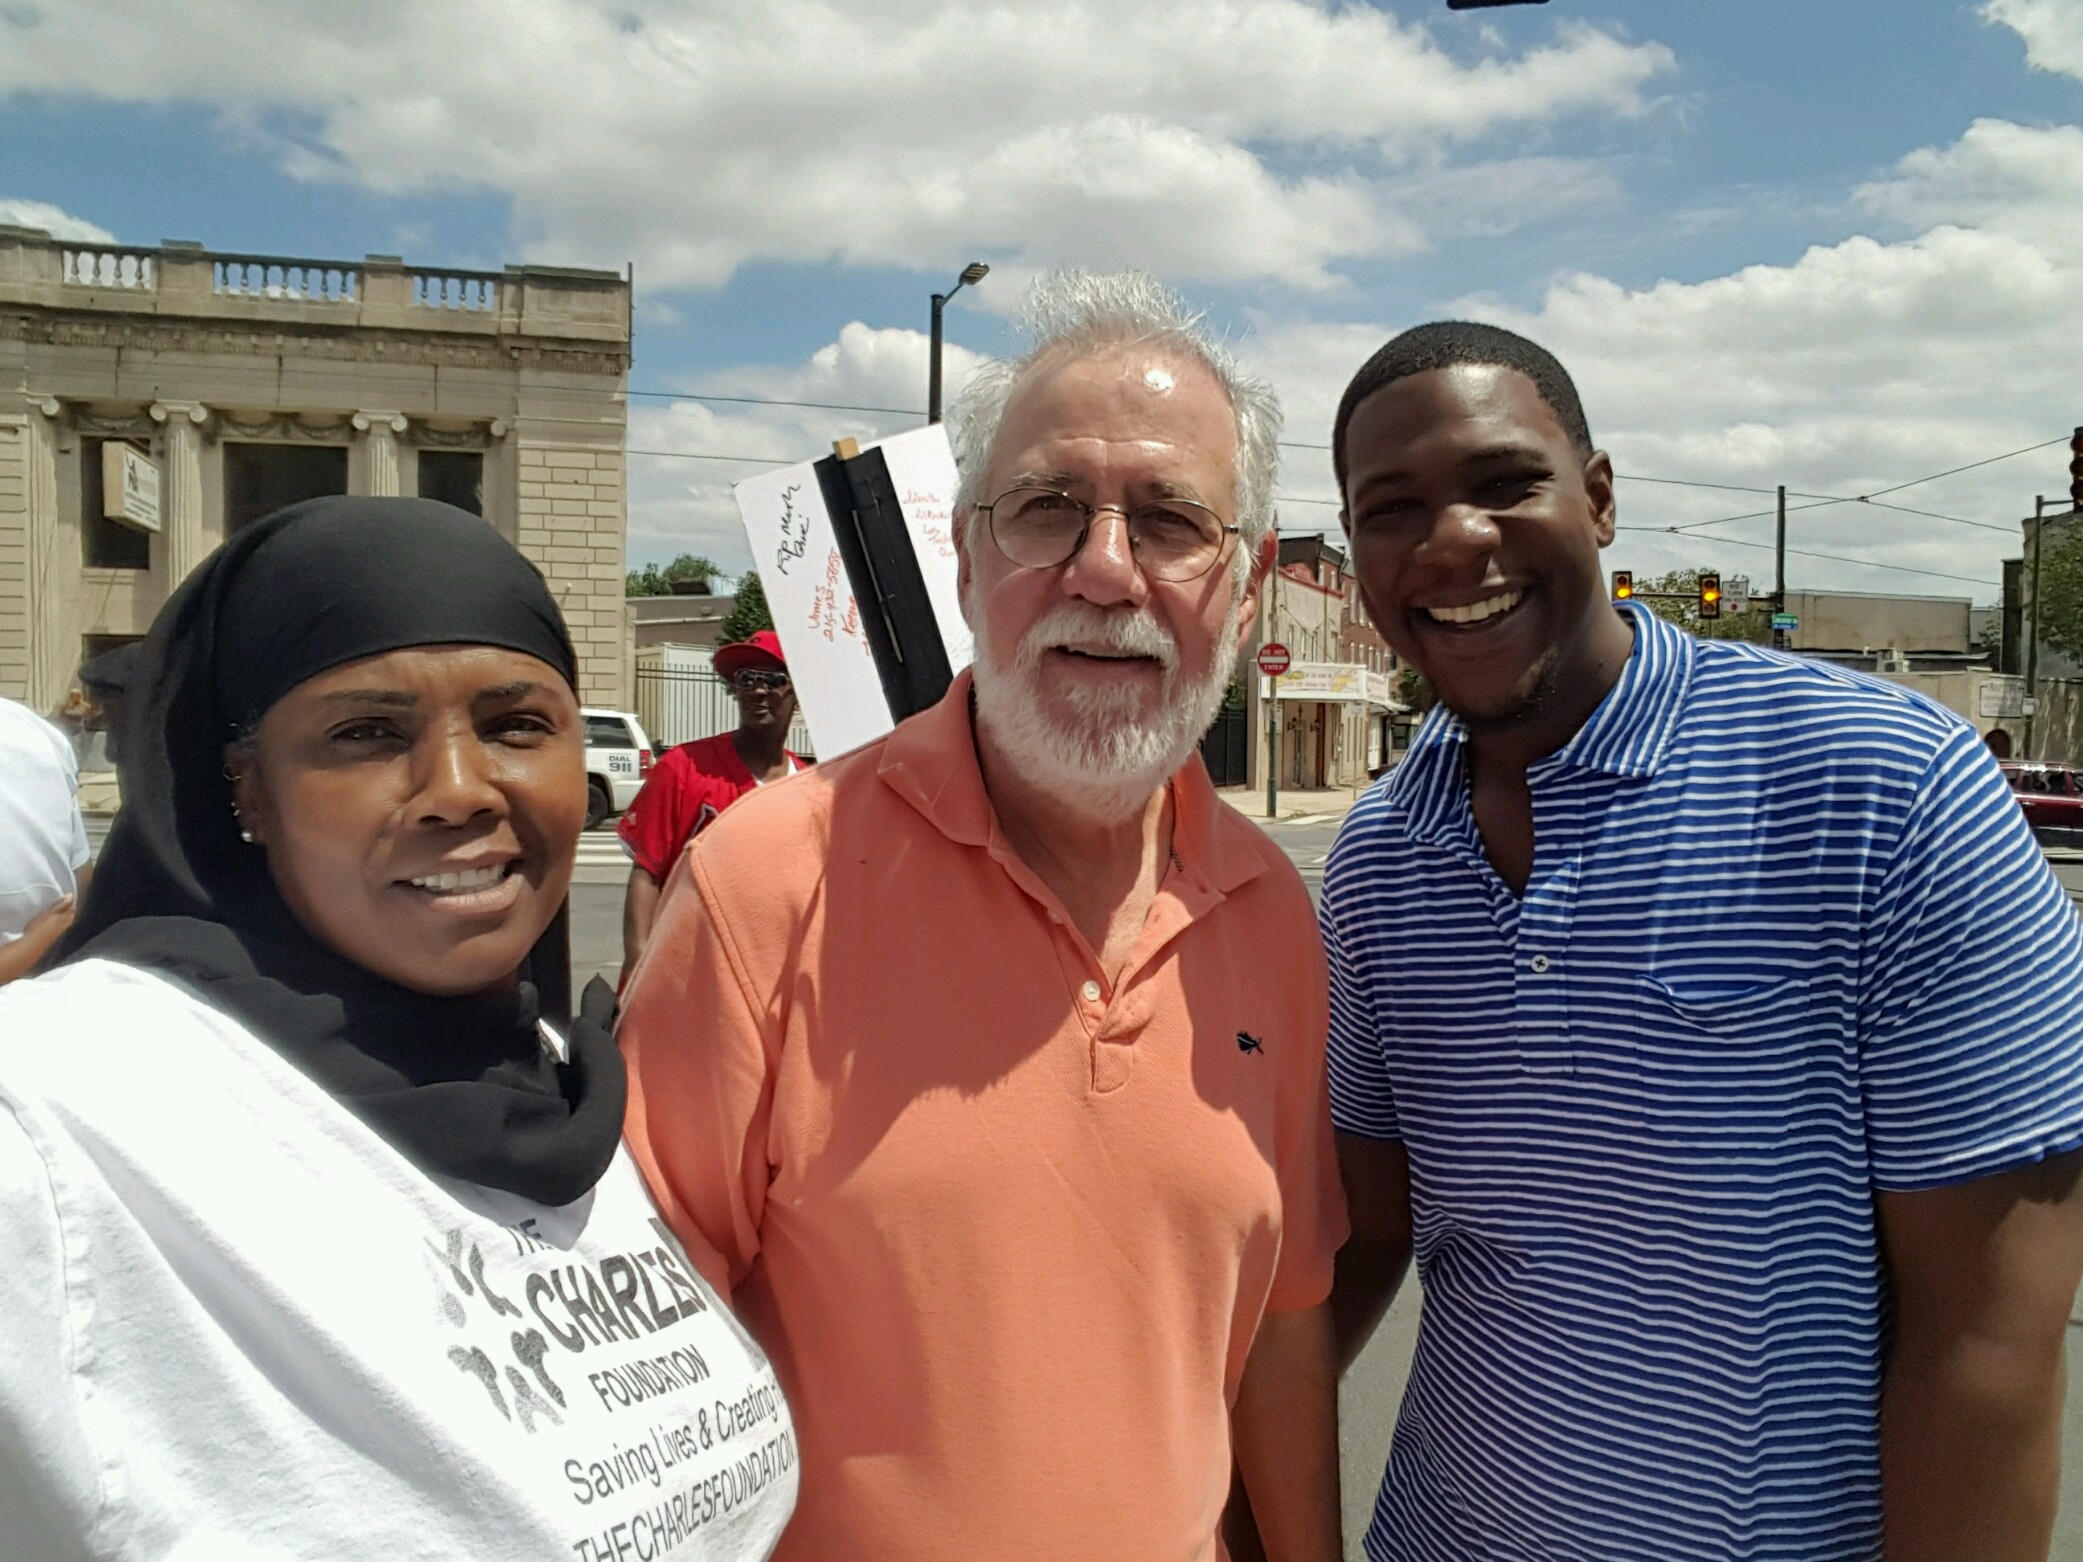 Bryan Miller of Heeding God's Call to End Gun Violence, and Michael Cogbill of CeaseFire PA